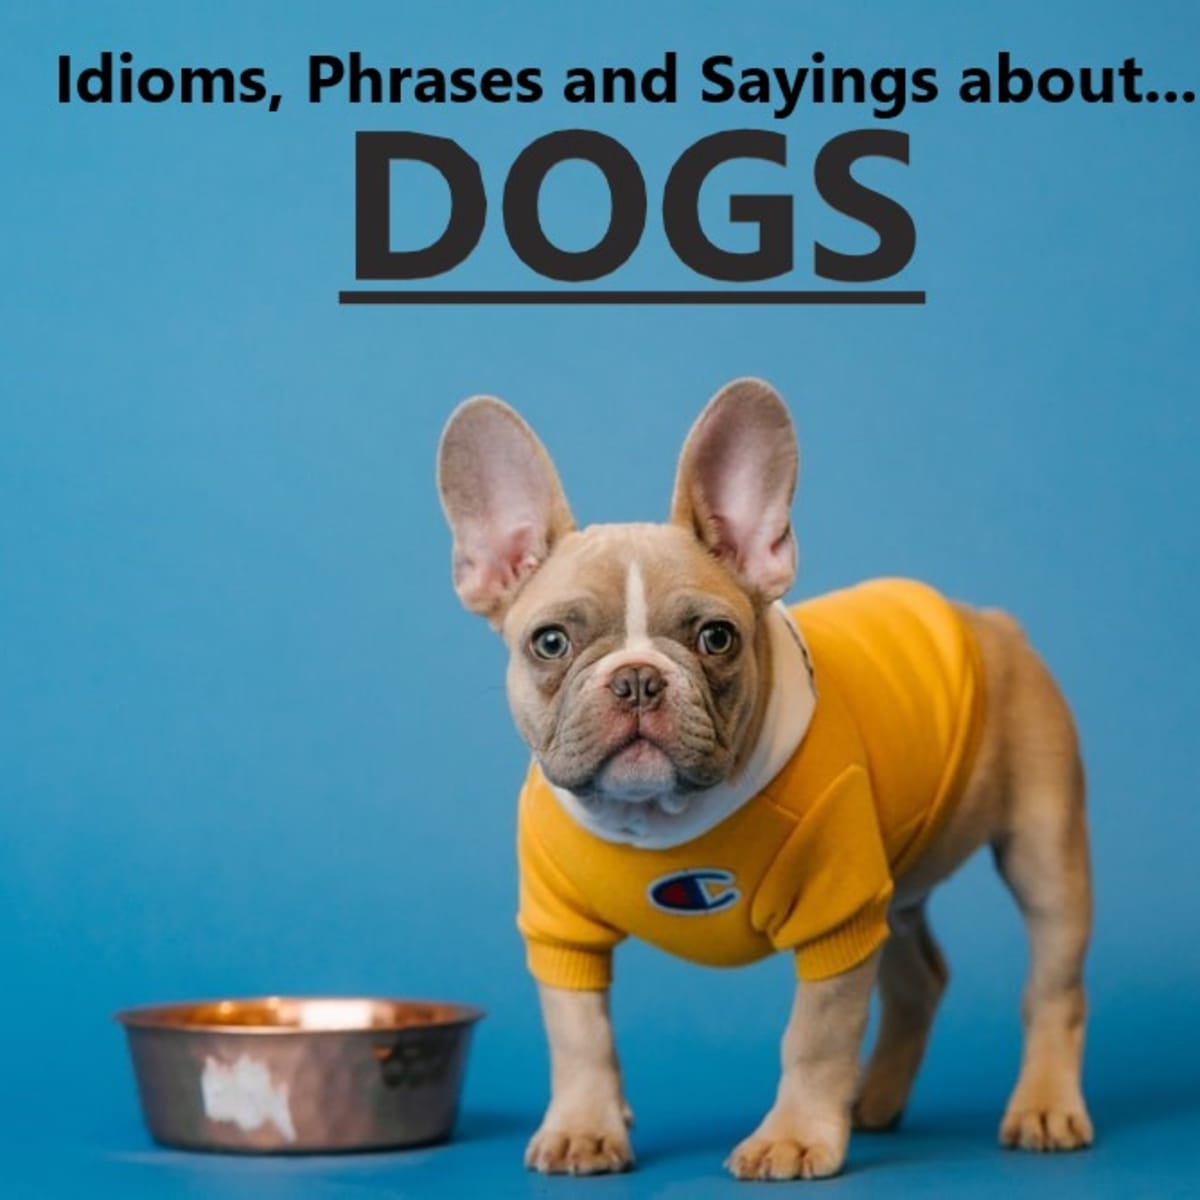 50+ Dog Idioms and Phrases in the English Language - Owlcation